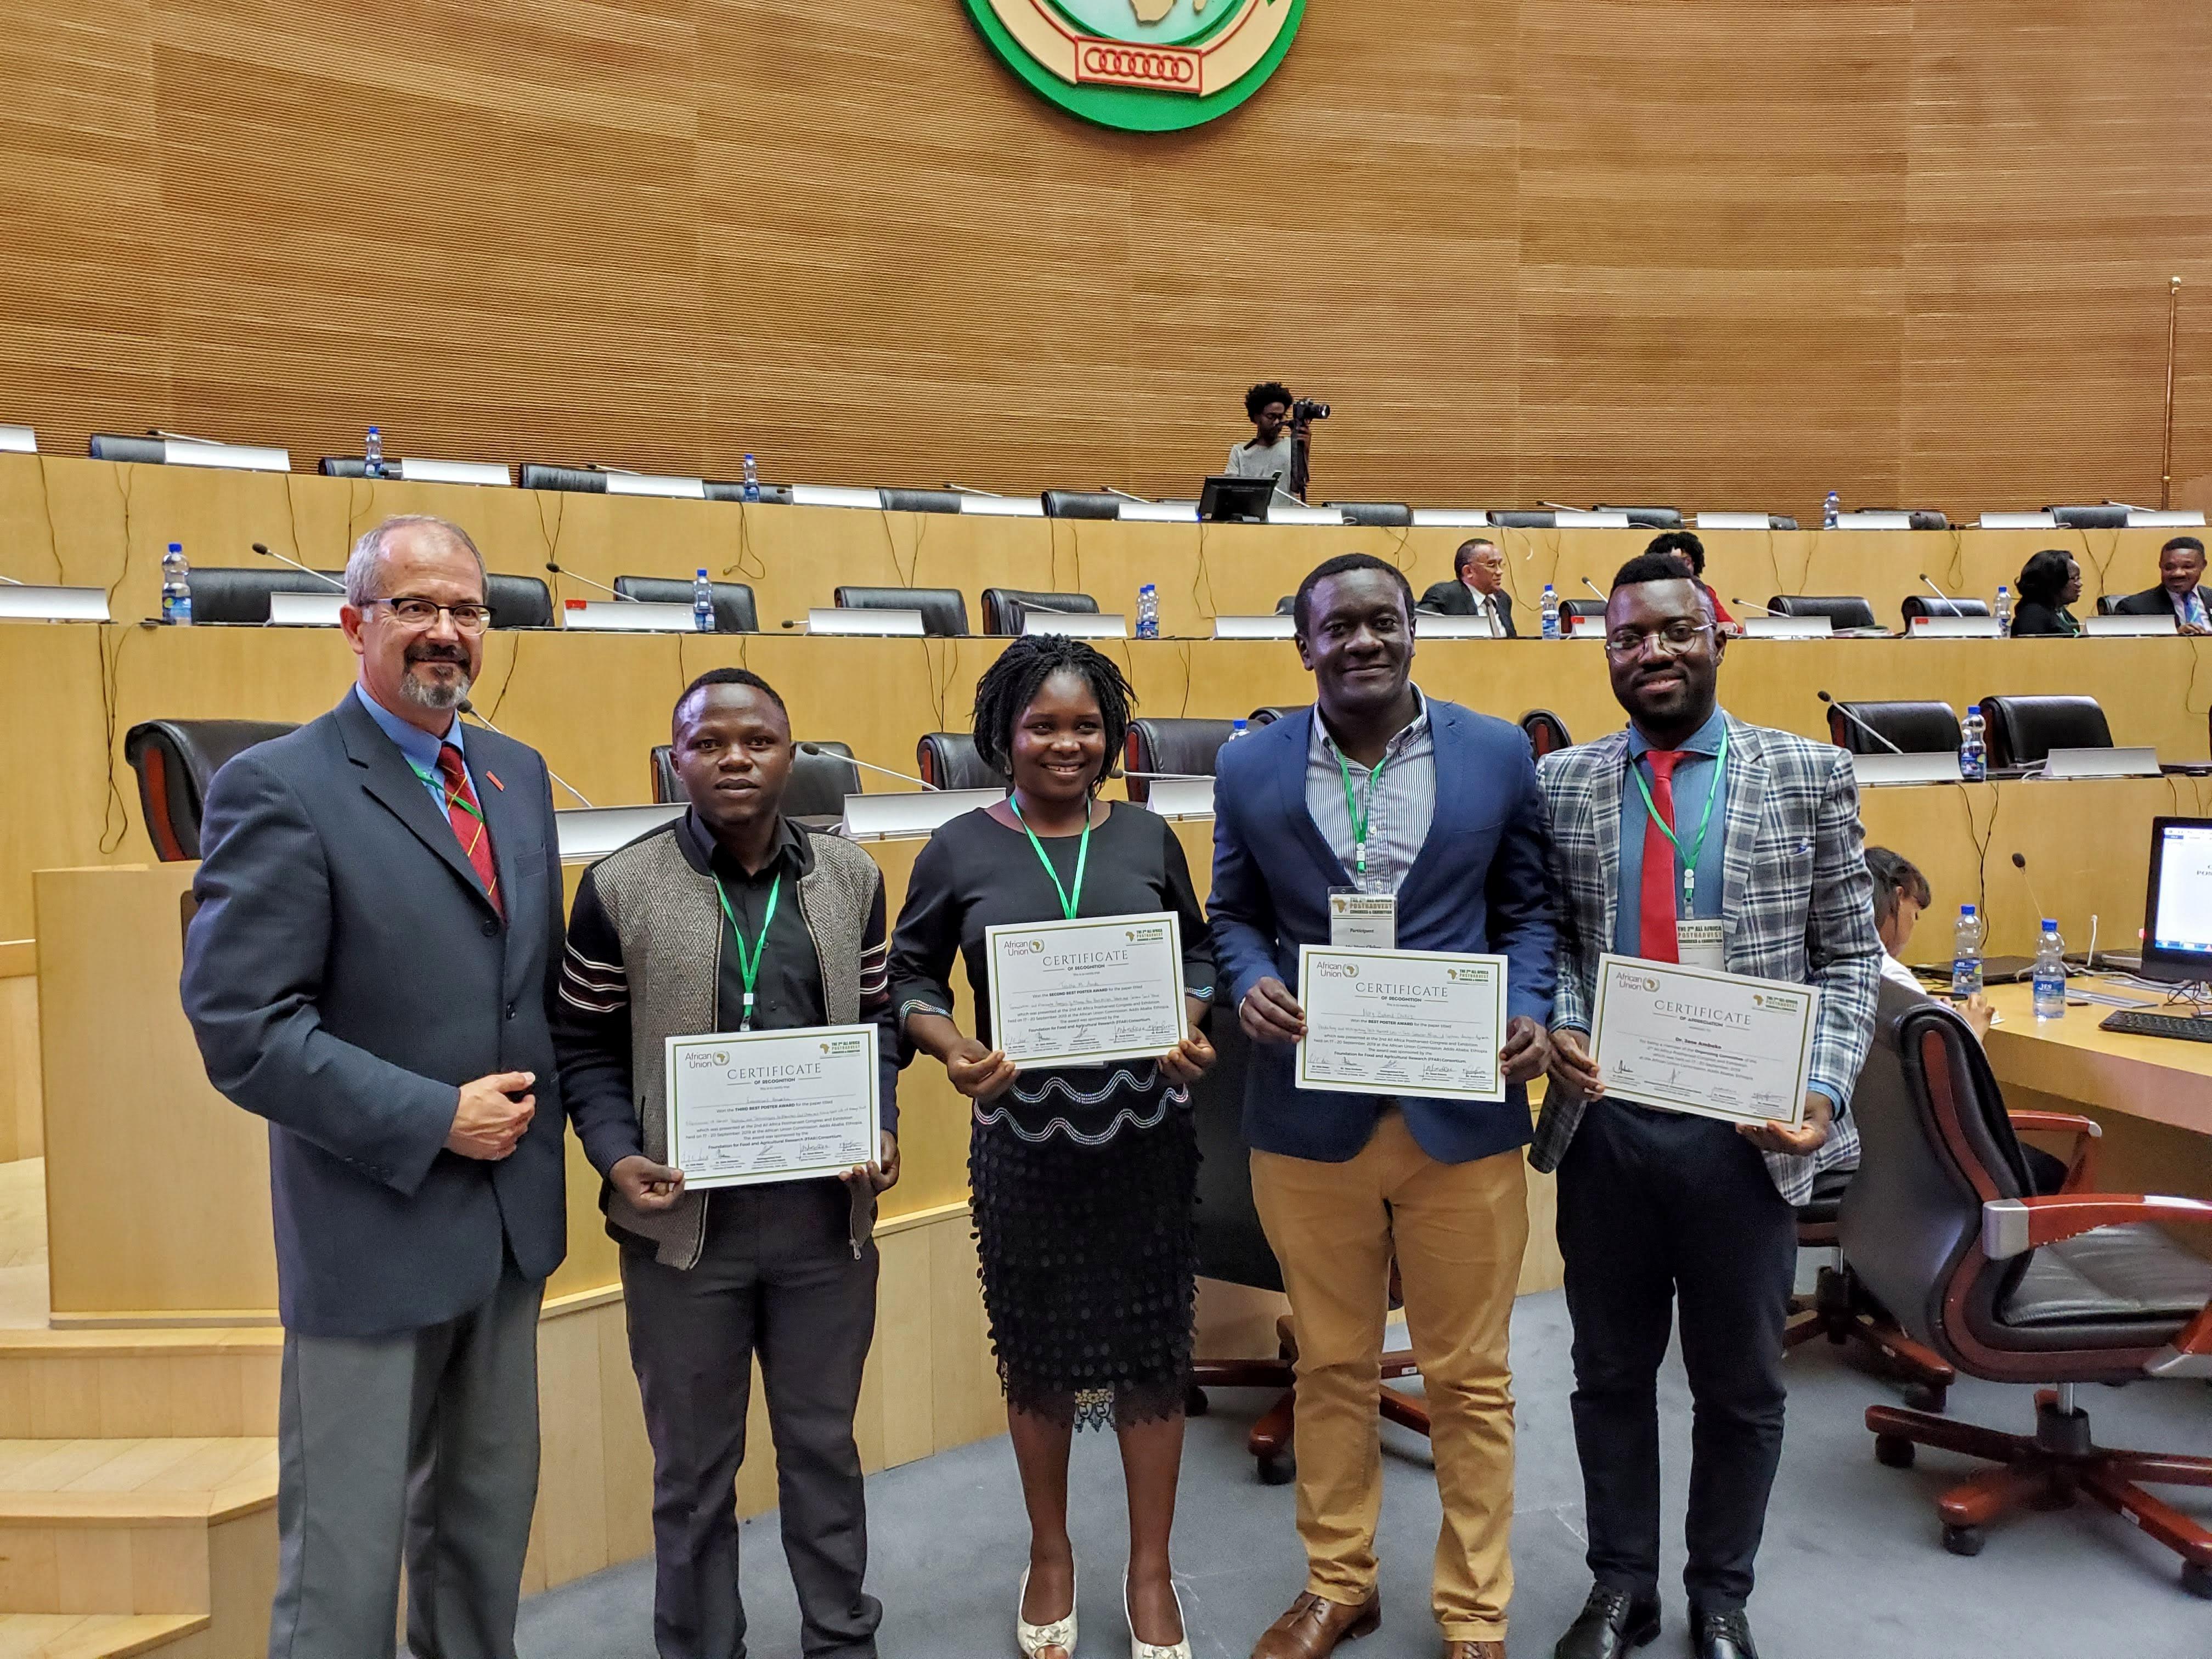 Winners of the Consortium sponsored student poster session at the 2nd All-Africa Post-Harvest Congress with Dr. Dirk Maier (left) and Dr. Olaniyi A. Fawole (Right) 